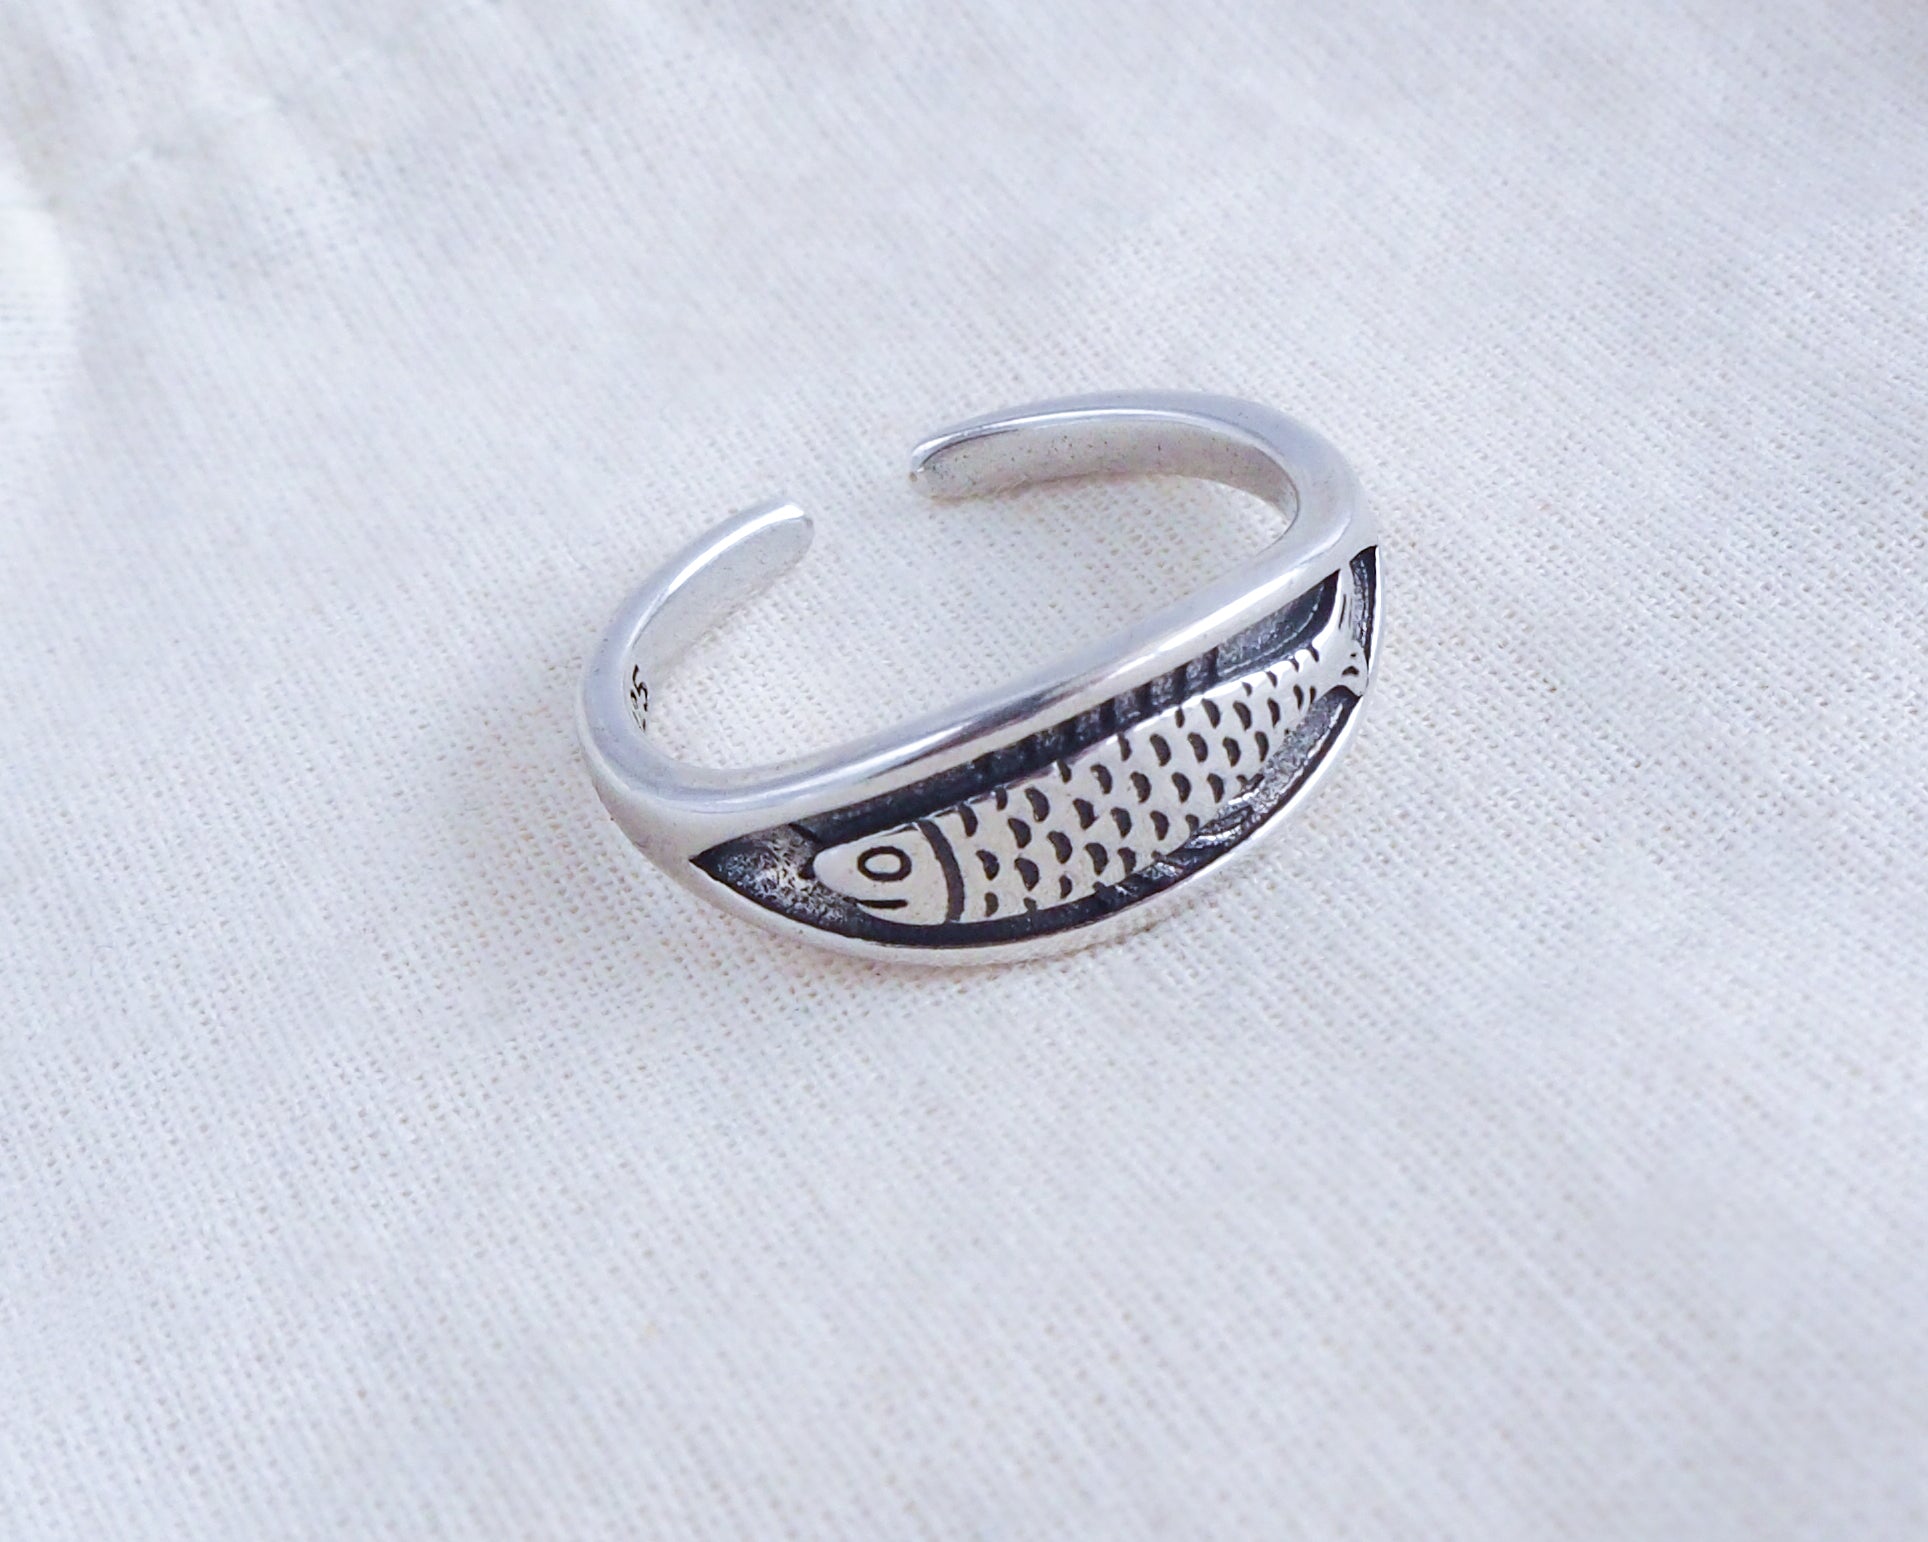 Sardine Fish Ring made with 925 Sterling silver on display, Sardine jewelry from Portugal, Coastal style, Minimalistic jewelry